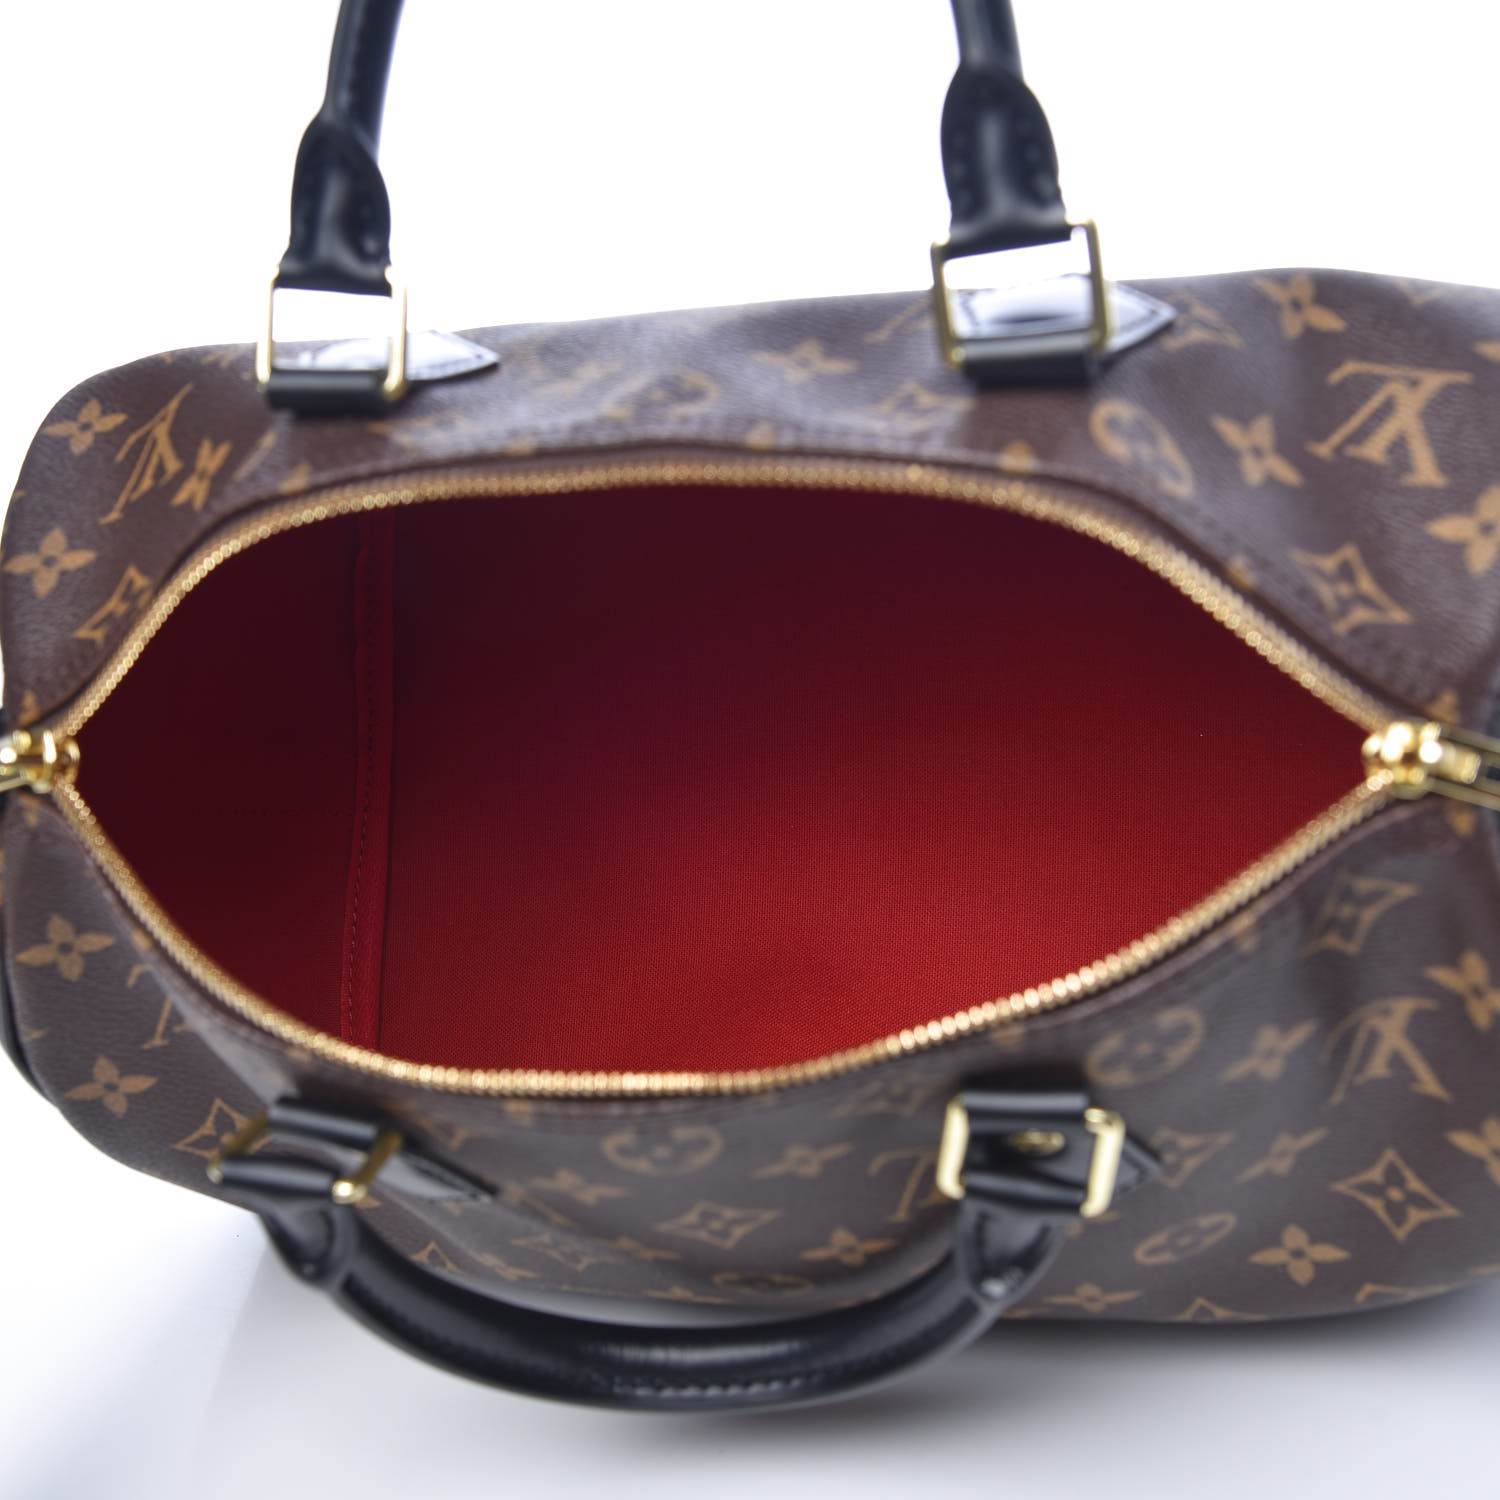 Personalize your Louis Vuitton with Mon Monogram - PurseBlog  Louis  vuitton monogram, Louis vuitton, Louis vuitton luggage